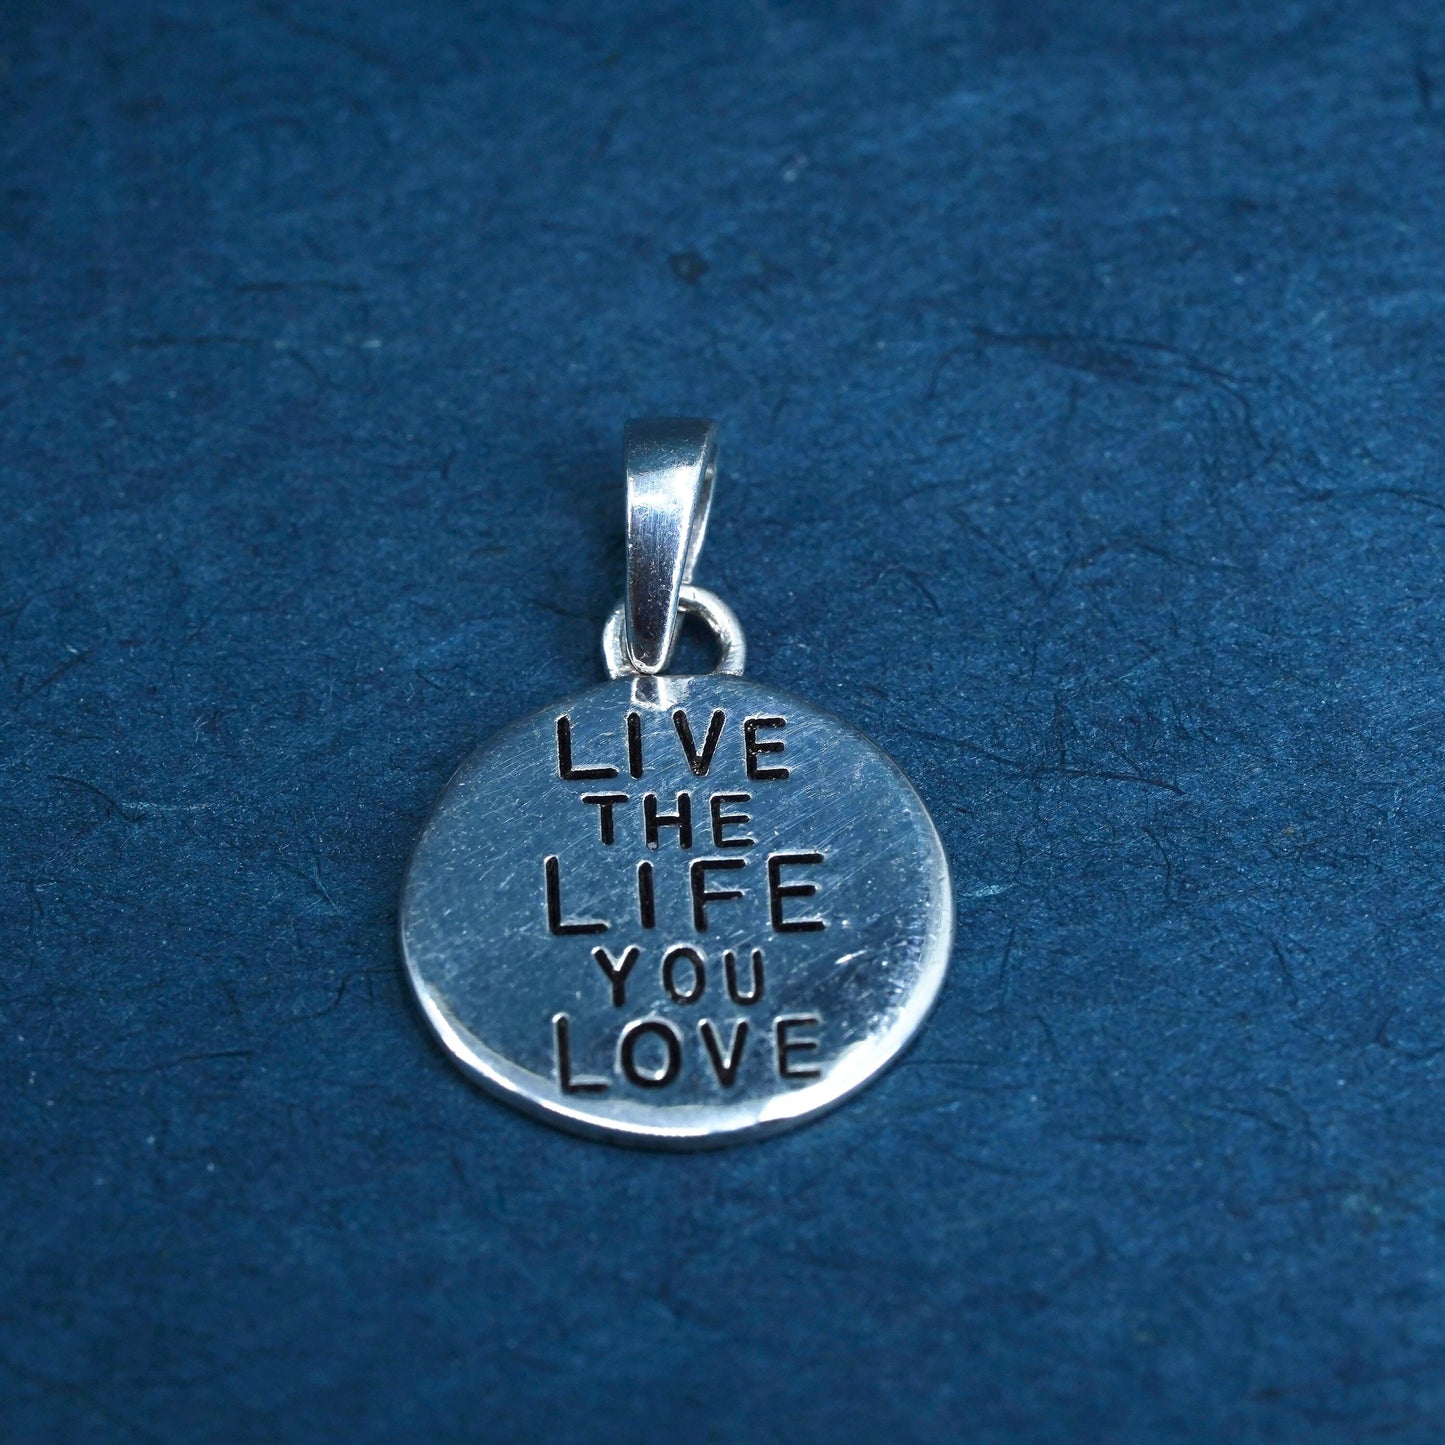 sterling silver pendant, 925 tag charm engaged "love the life we live"